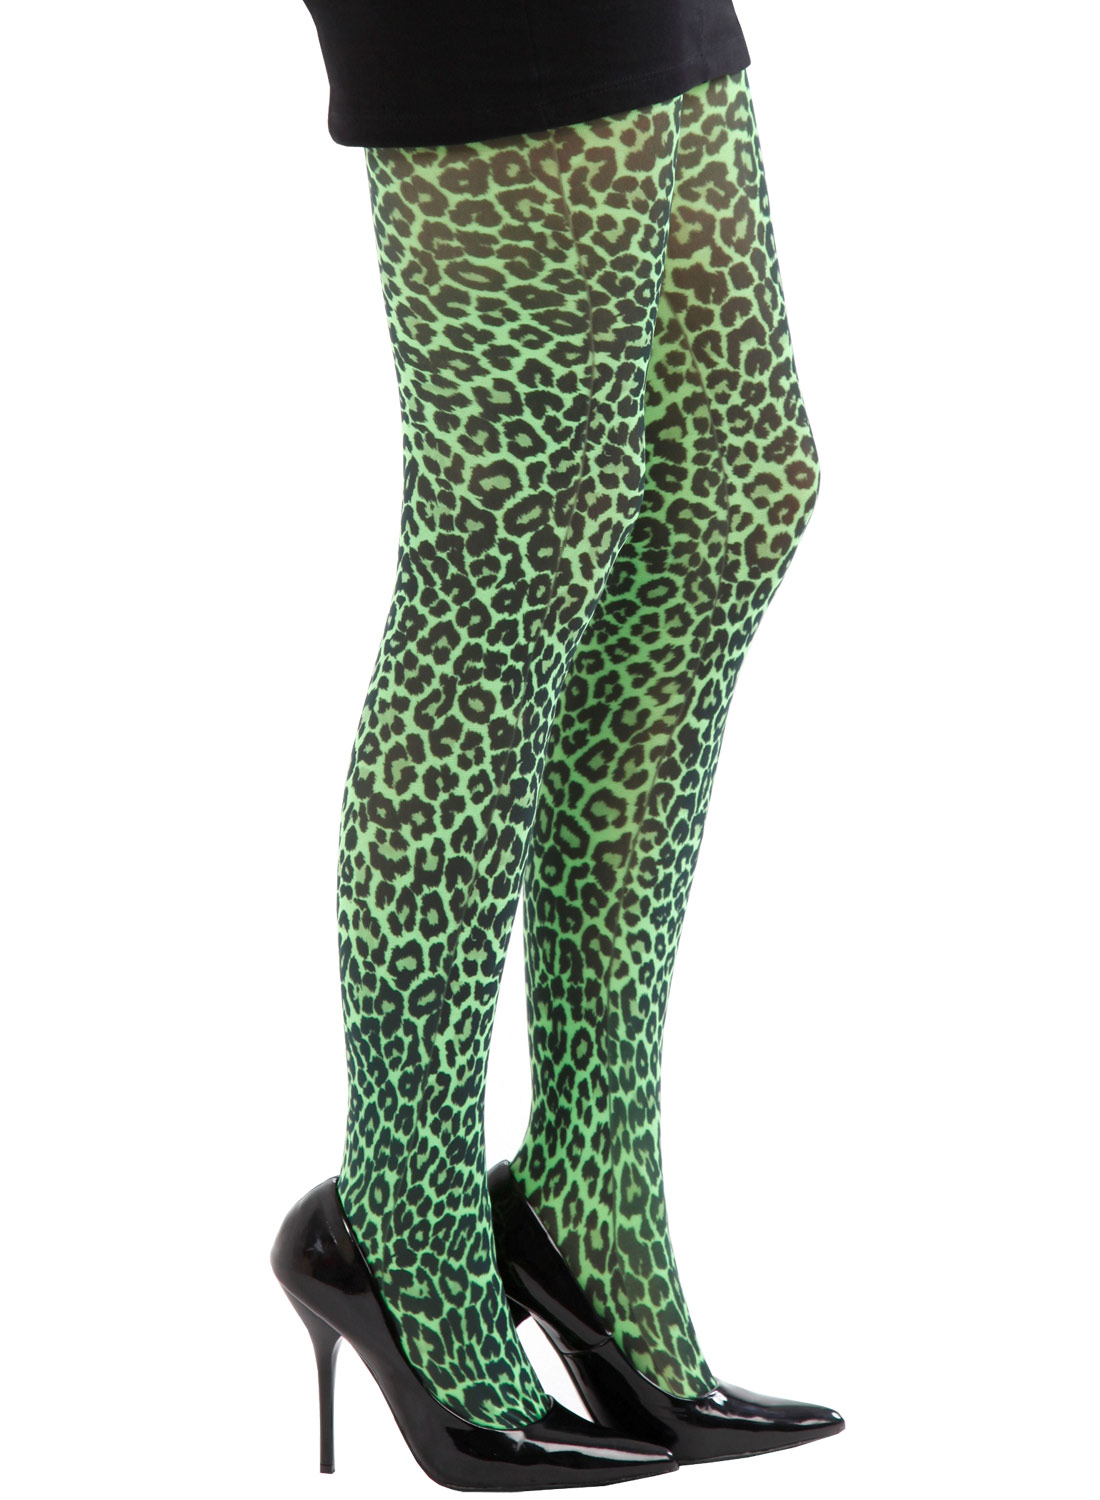 Leopard Printed Tights Flo Green